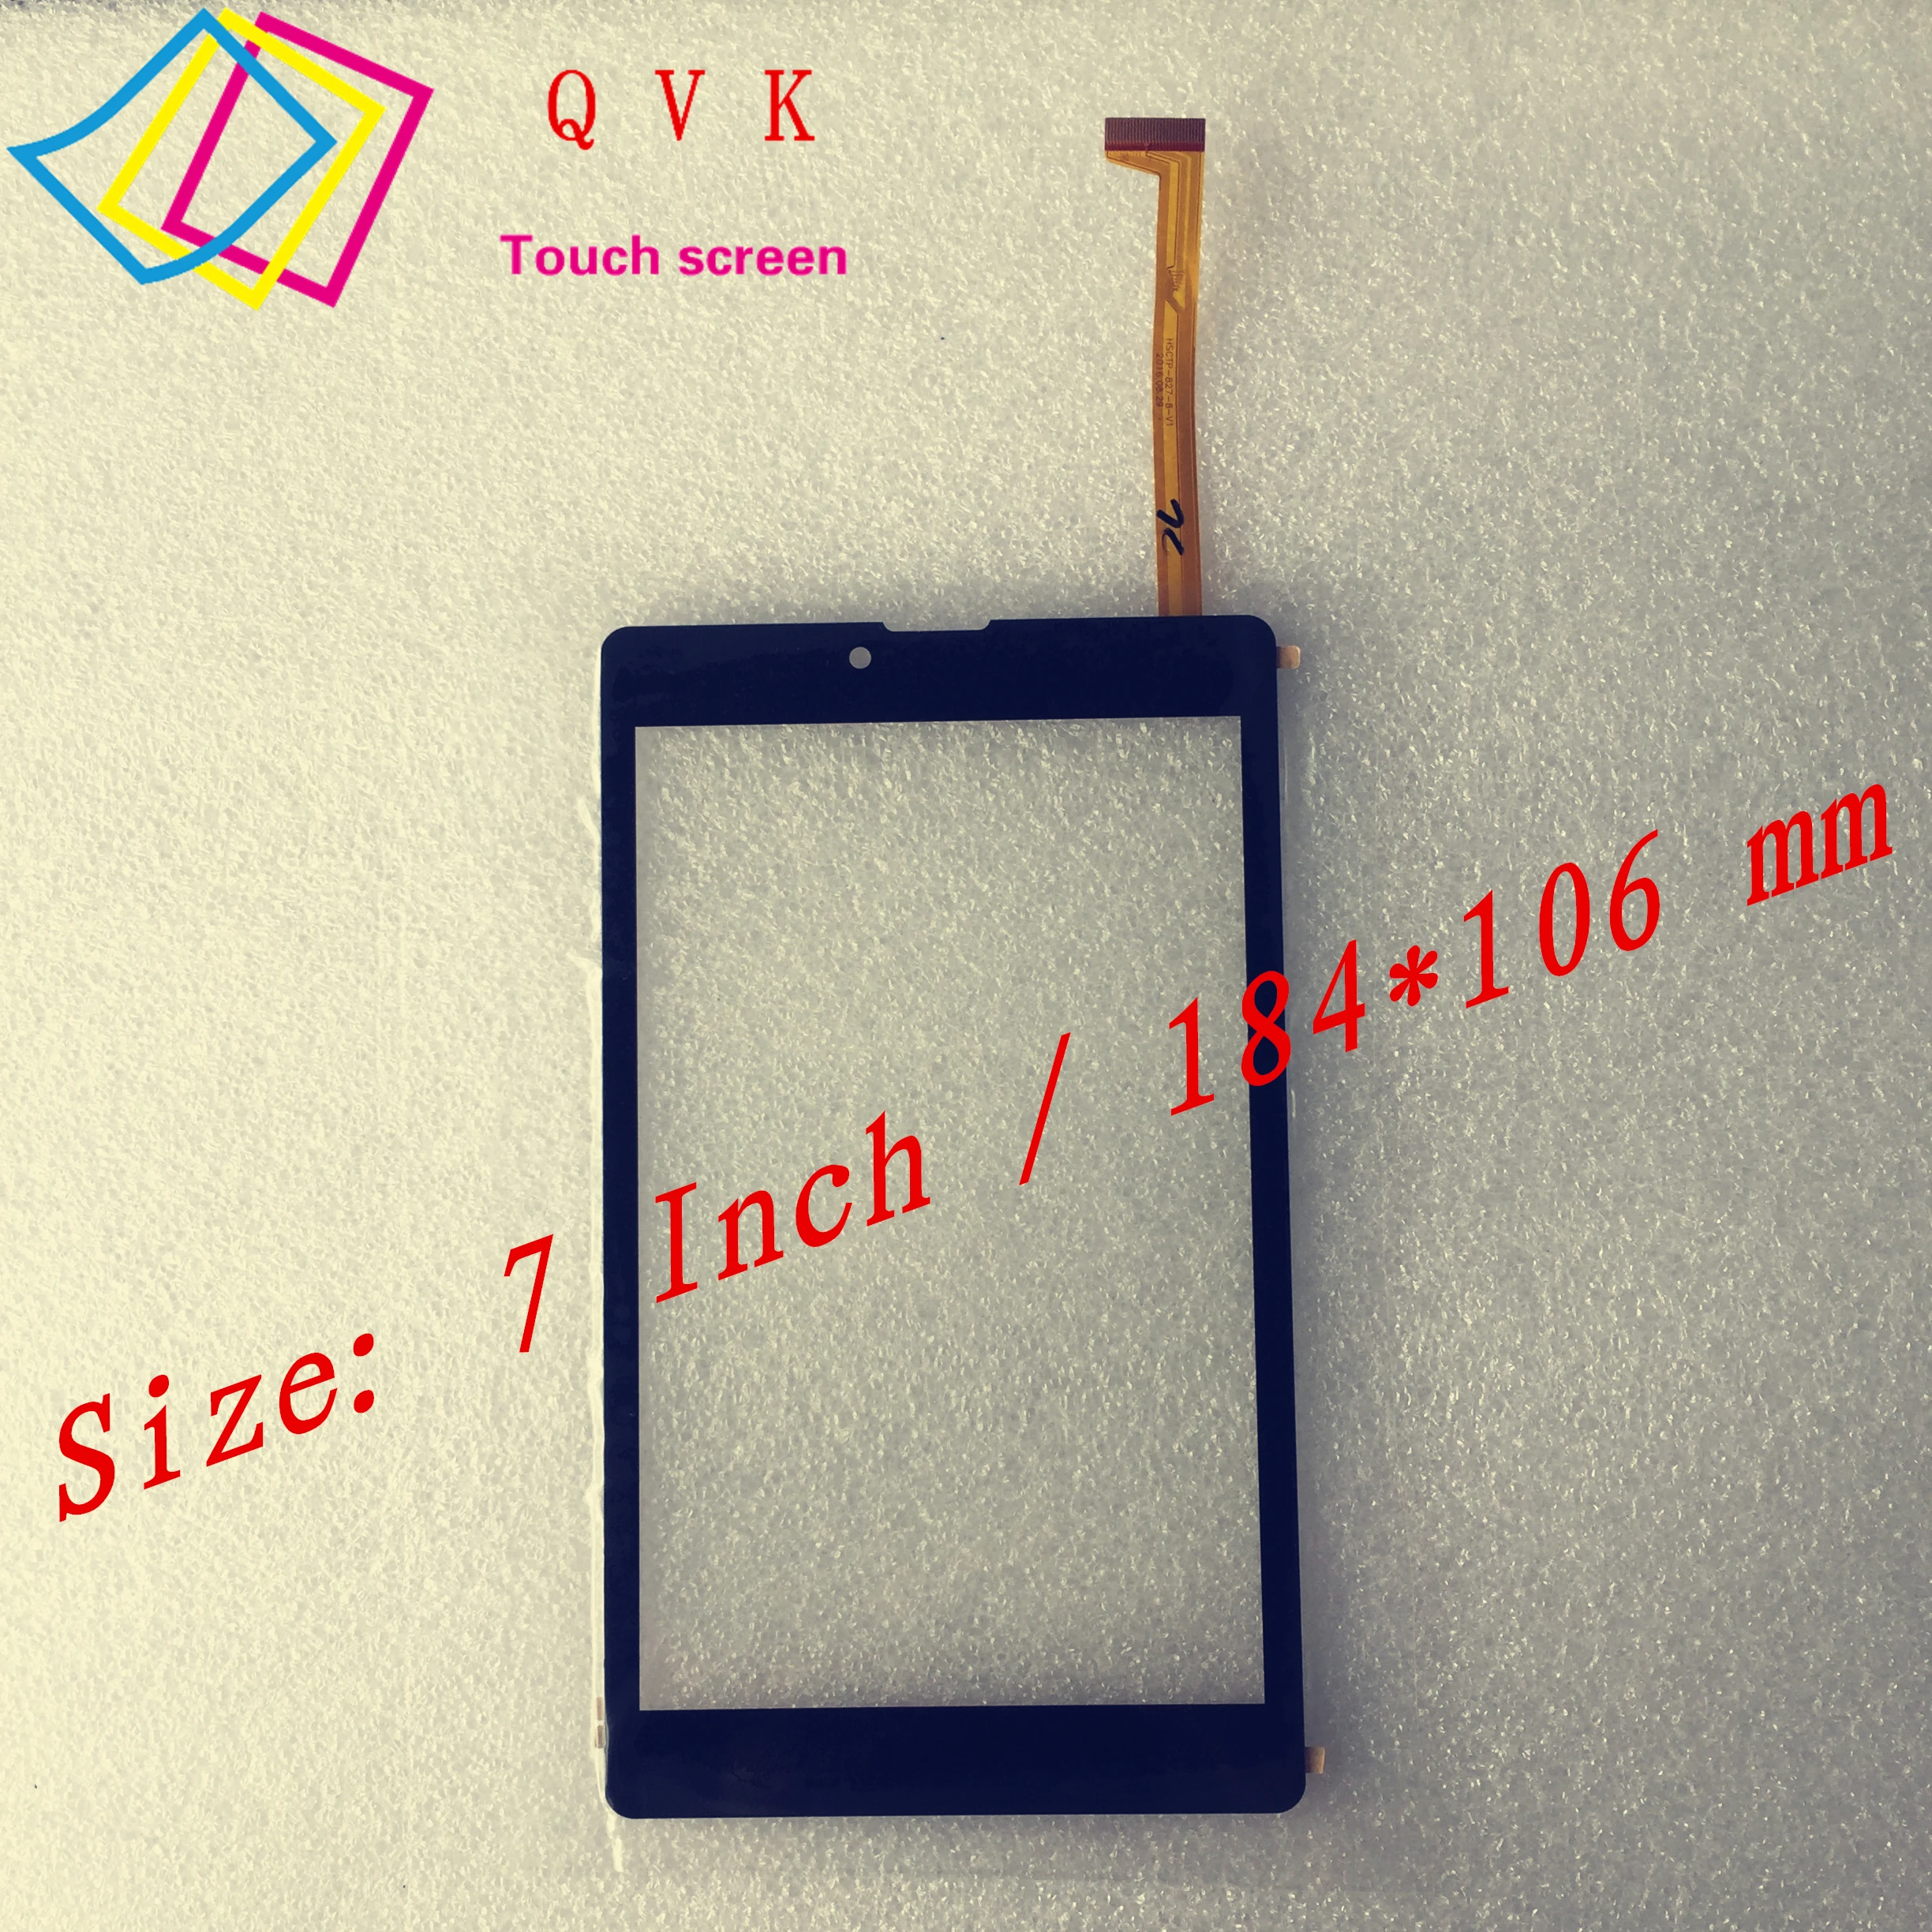 

10PCS P/N HSCTP-827-8-V1 2016.08.29 For DIGMA OPTIMA 7306S 4G TS7089 tablet pc capacitive touch screen glass digitizer panel